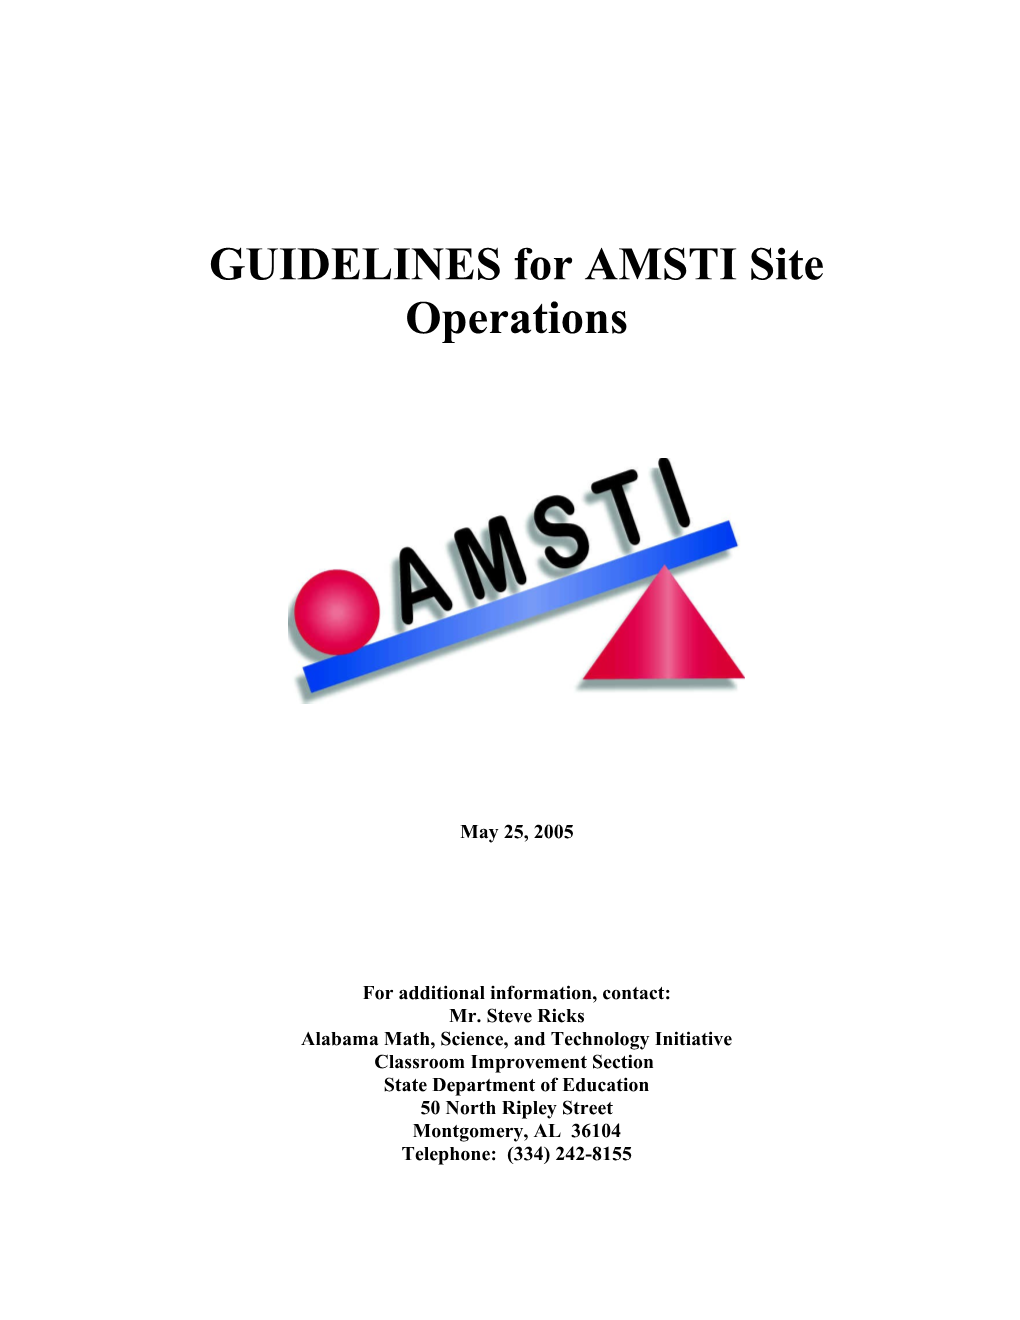 AMSTI Guidelines for AMSTI Site Operations